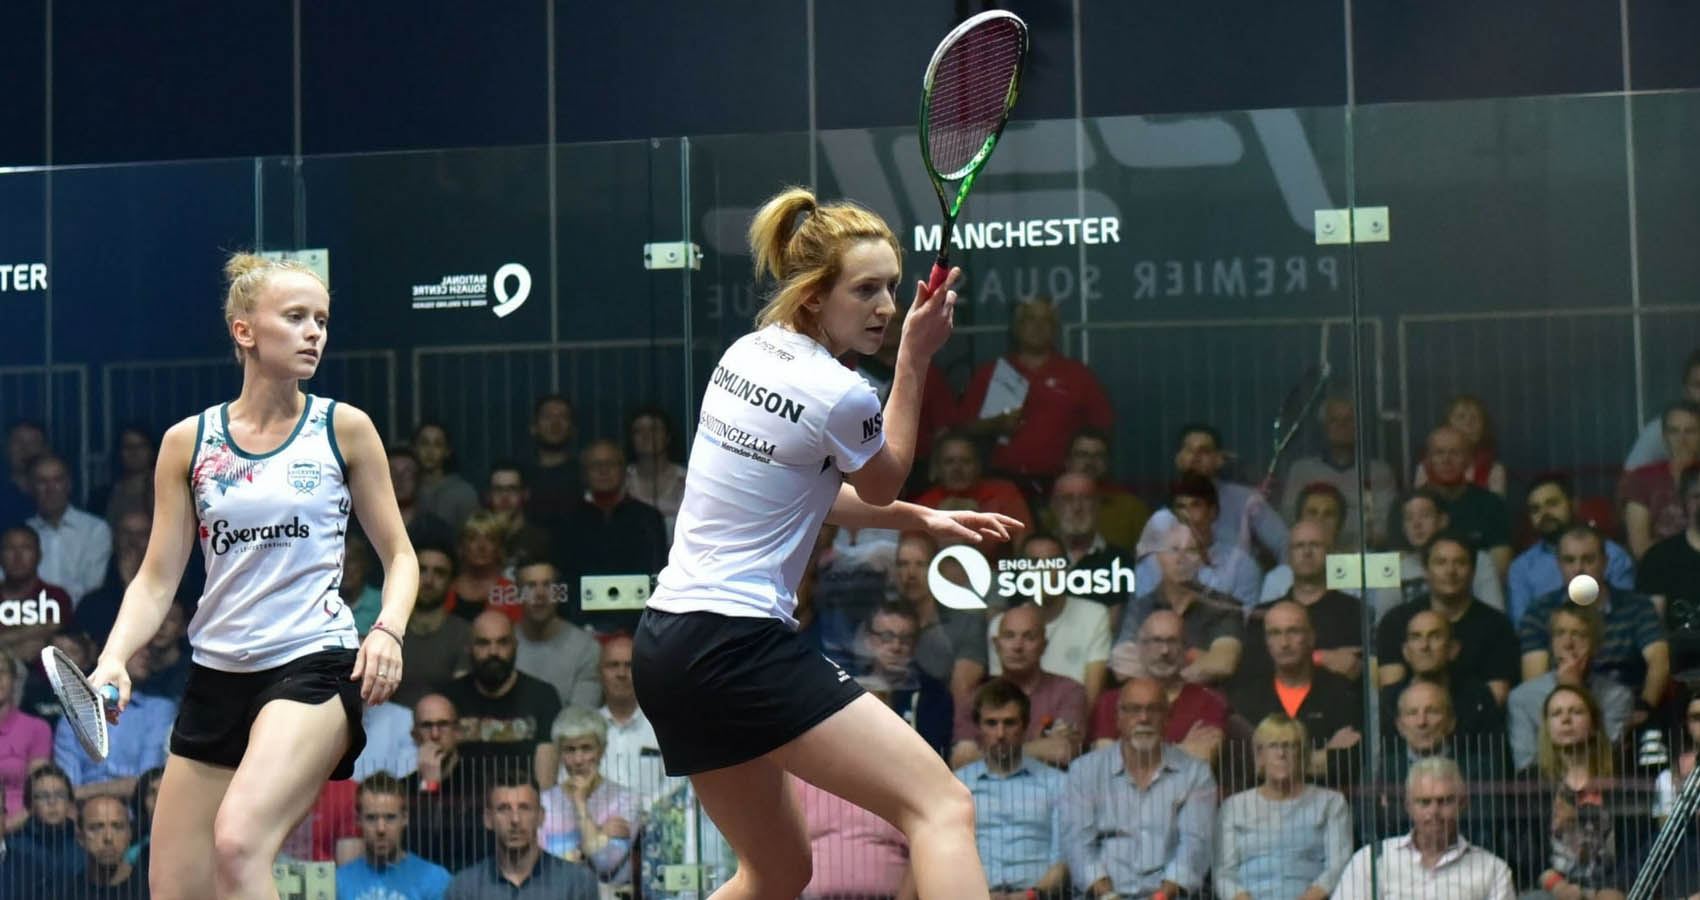 Millie Tomlinson beat Emily Whitlock 3-0 in a surprise win for Nottingham in this year's final